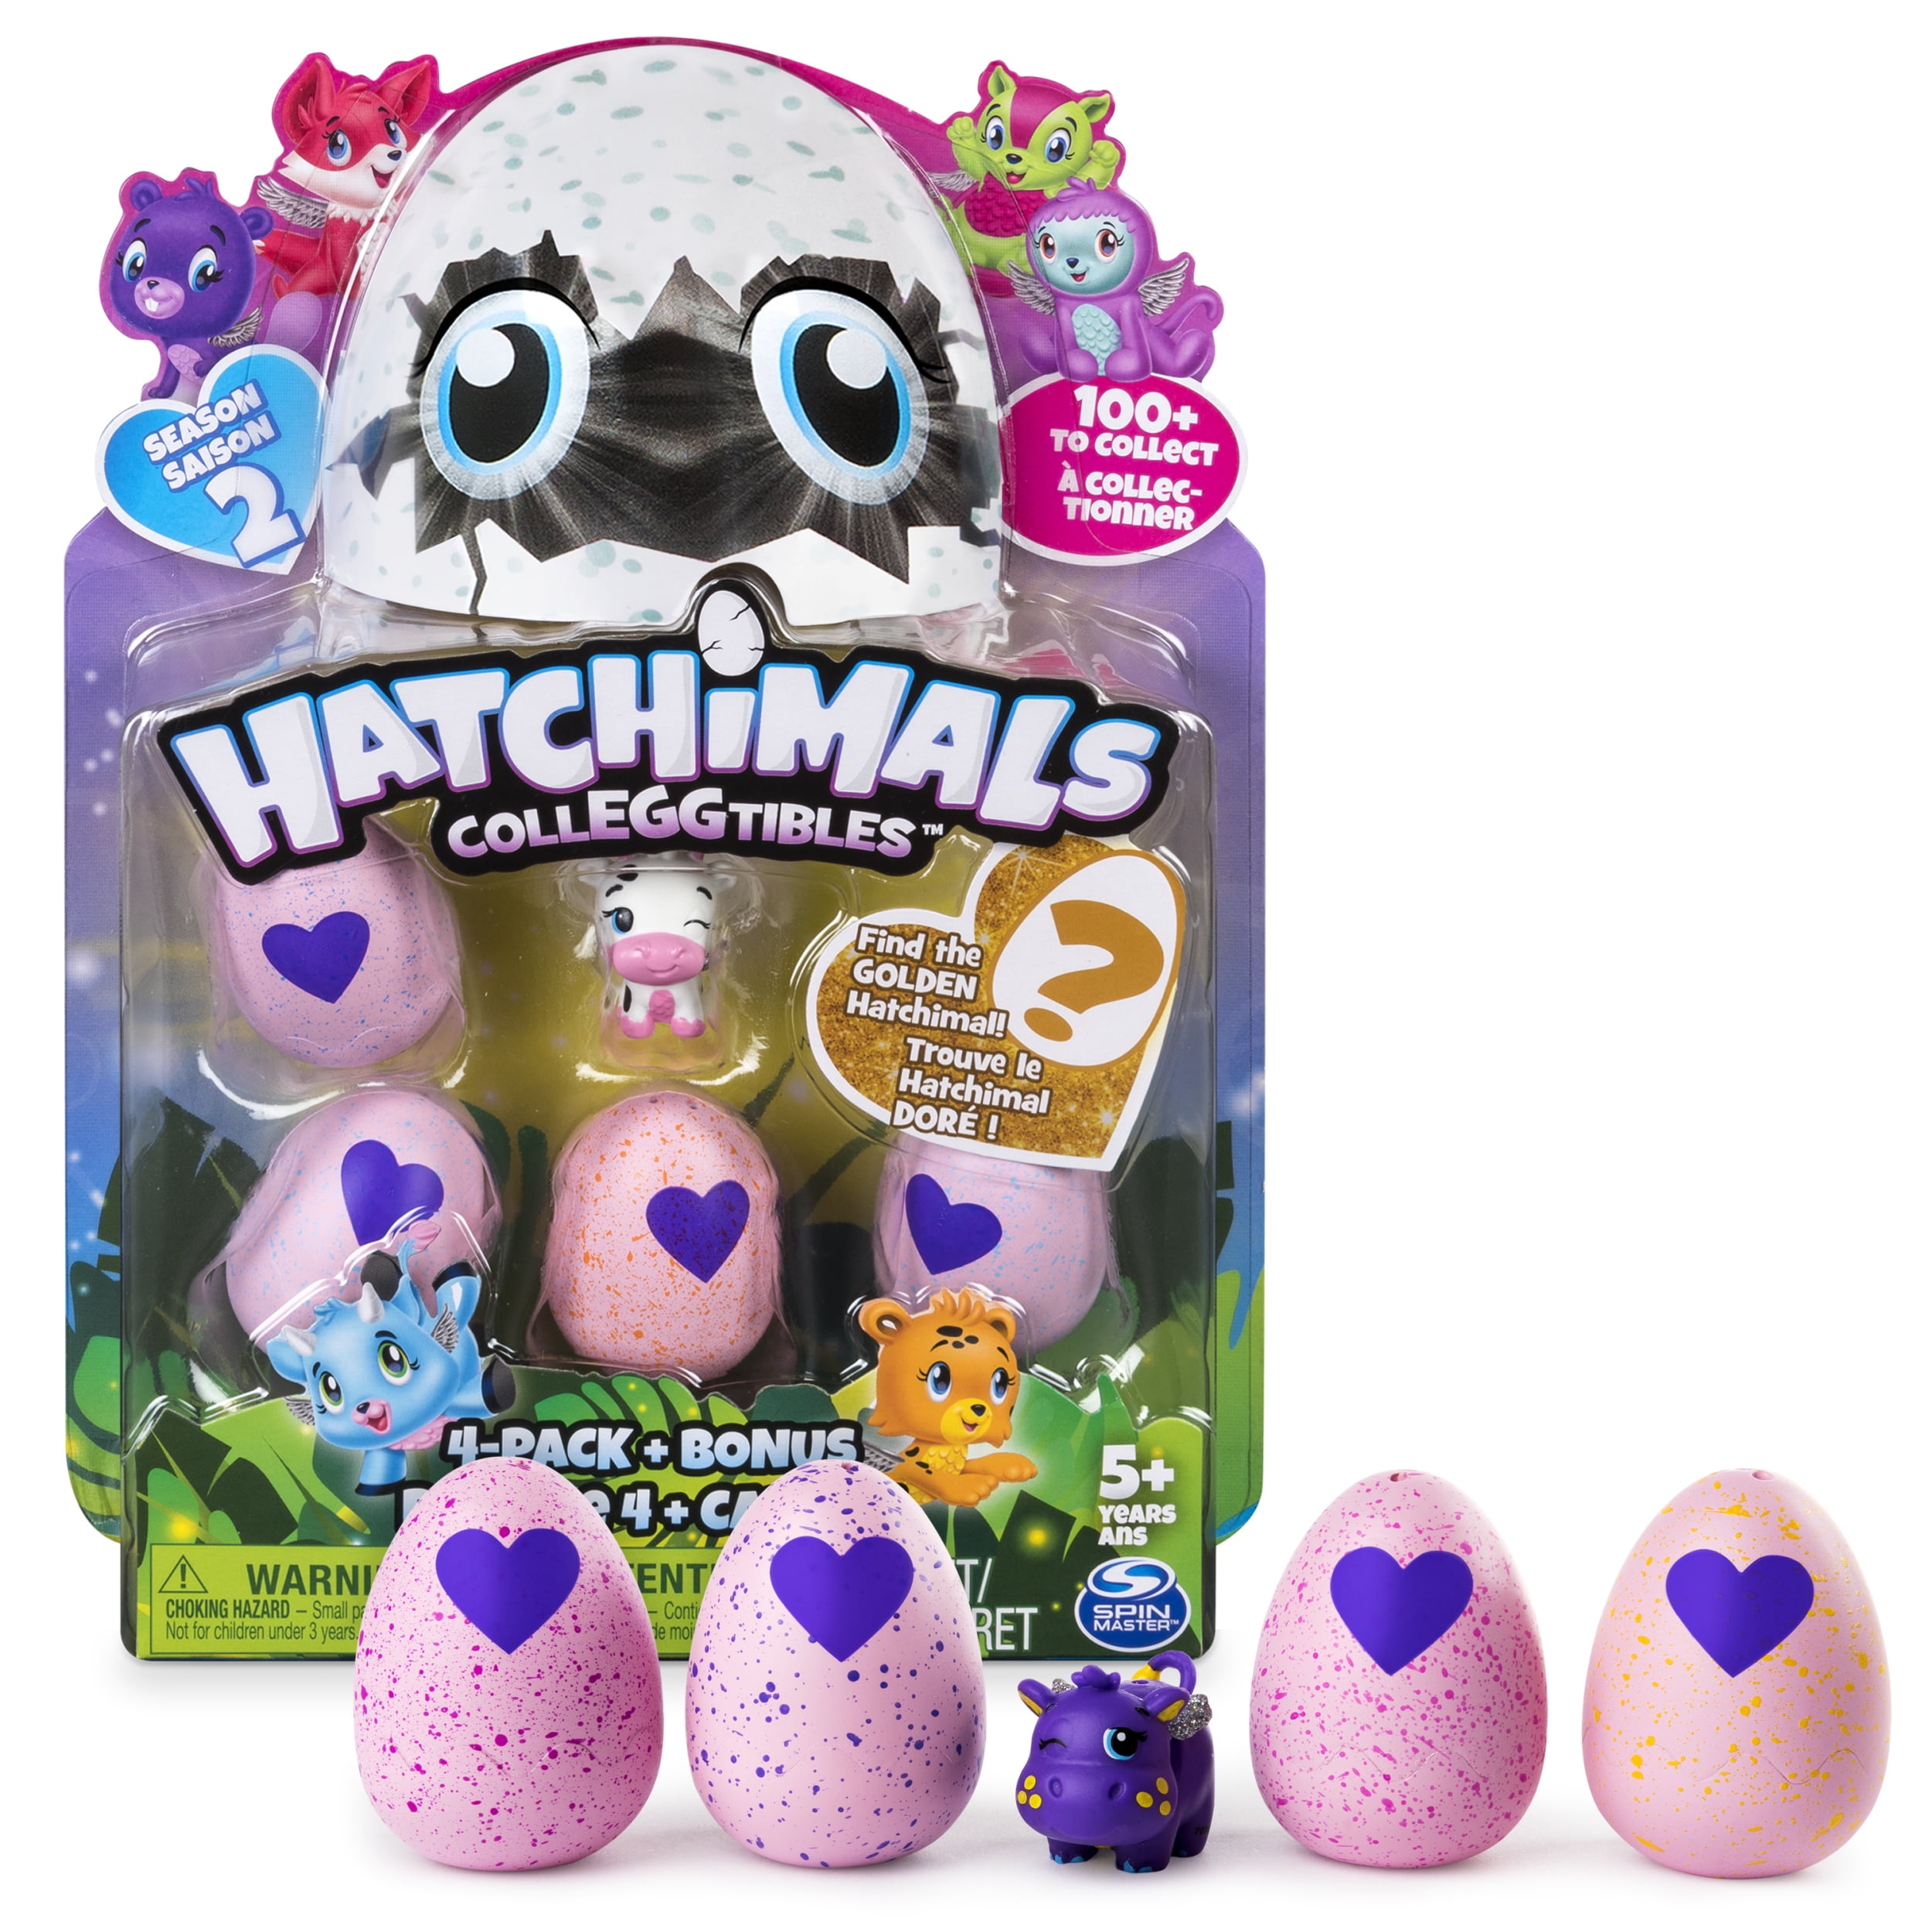 Free Shipping Hatchimals Colleggtibles 4Pk+Bonus Pack Collectable New 